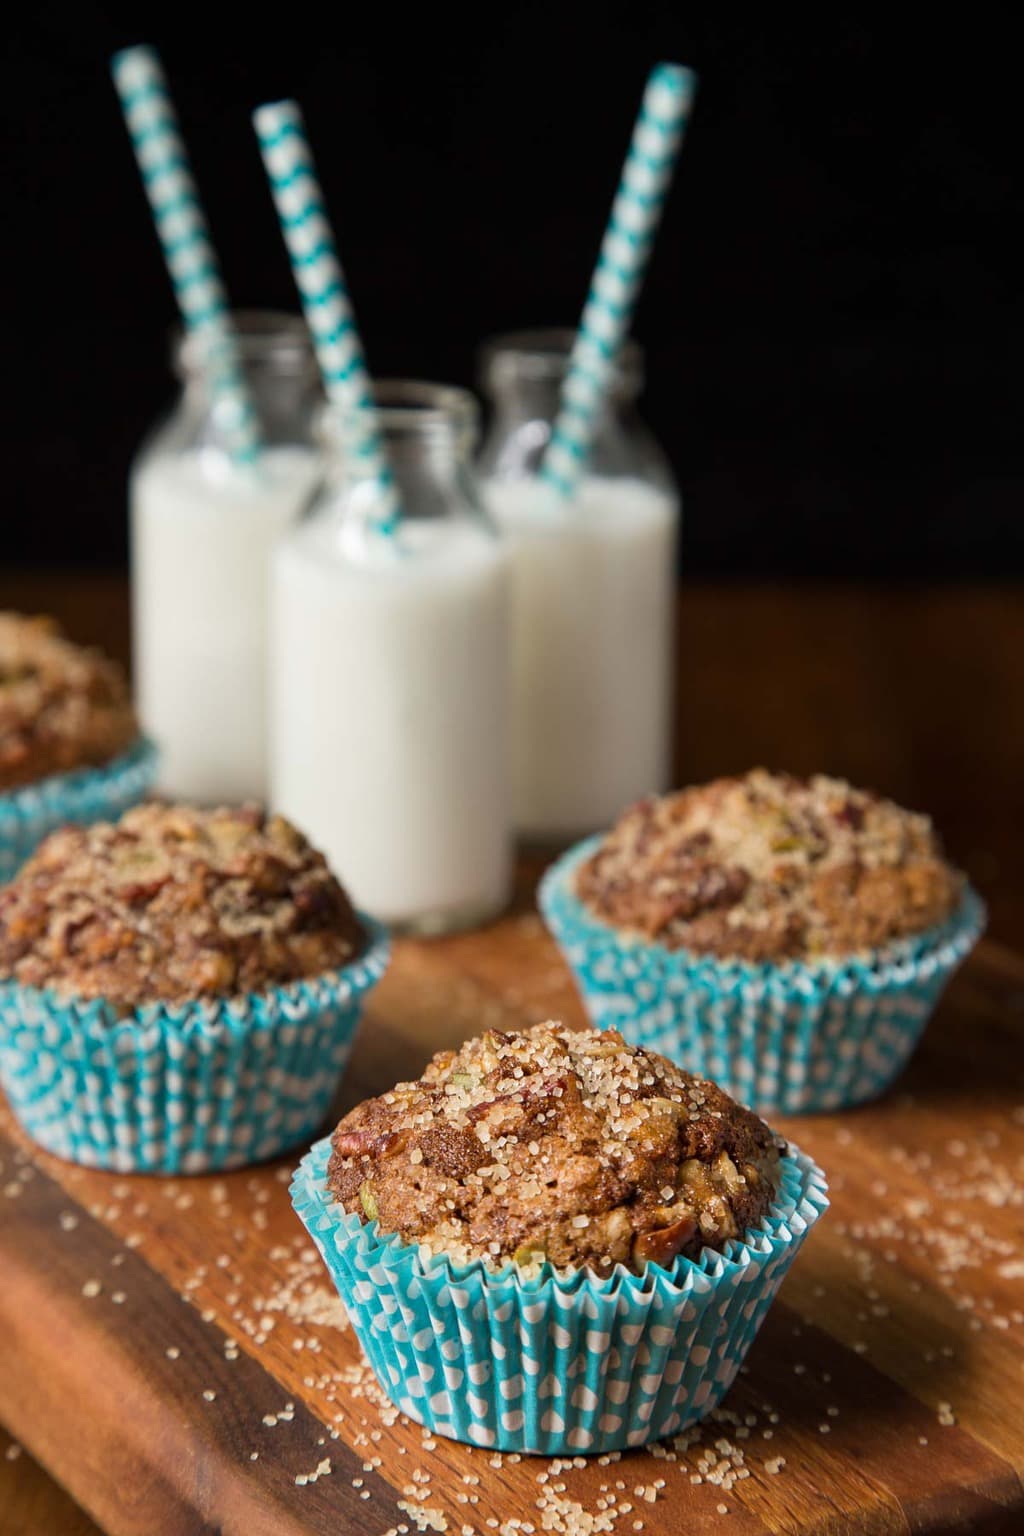 Vertical photo of Zucchini Morning Glory Muffins on a wooden cutting board with glass pints of milk in the background.